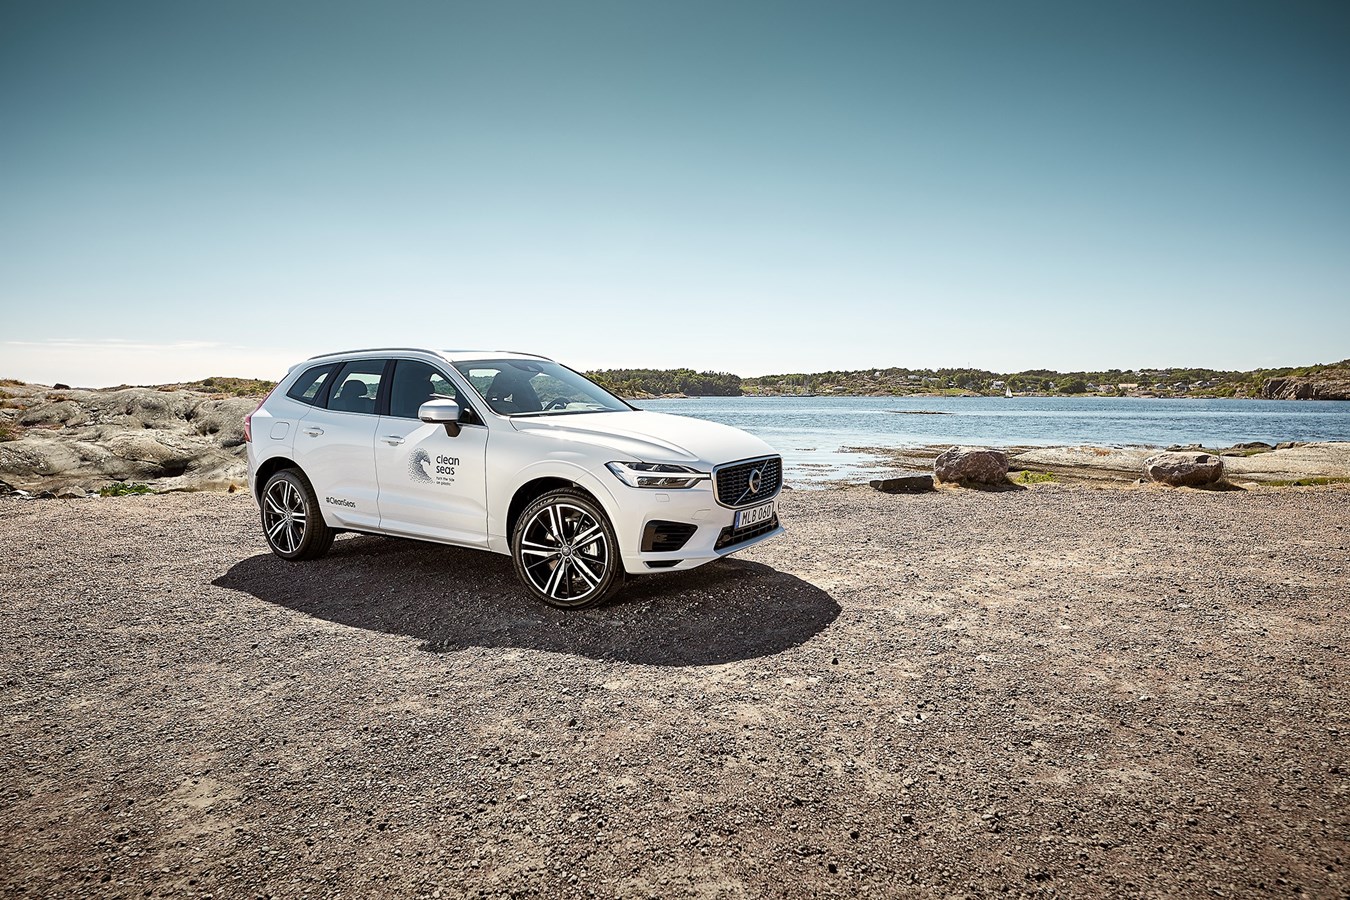 Volvo Cars aims for 25 per cent recycled plastics in every new car from 2025